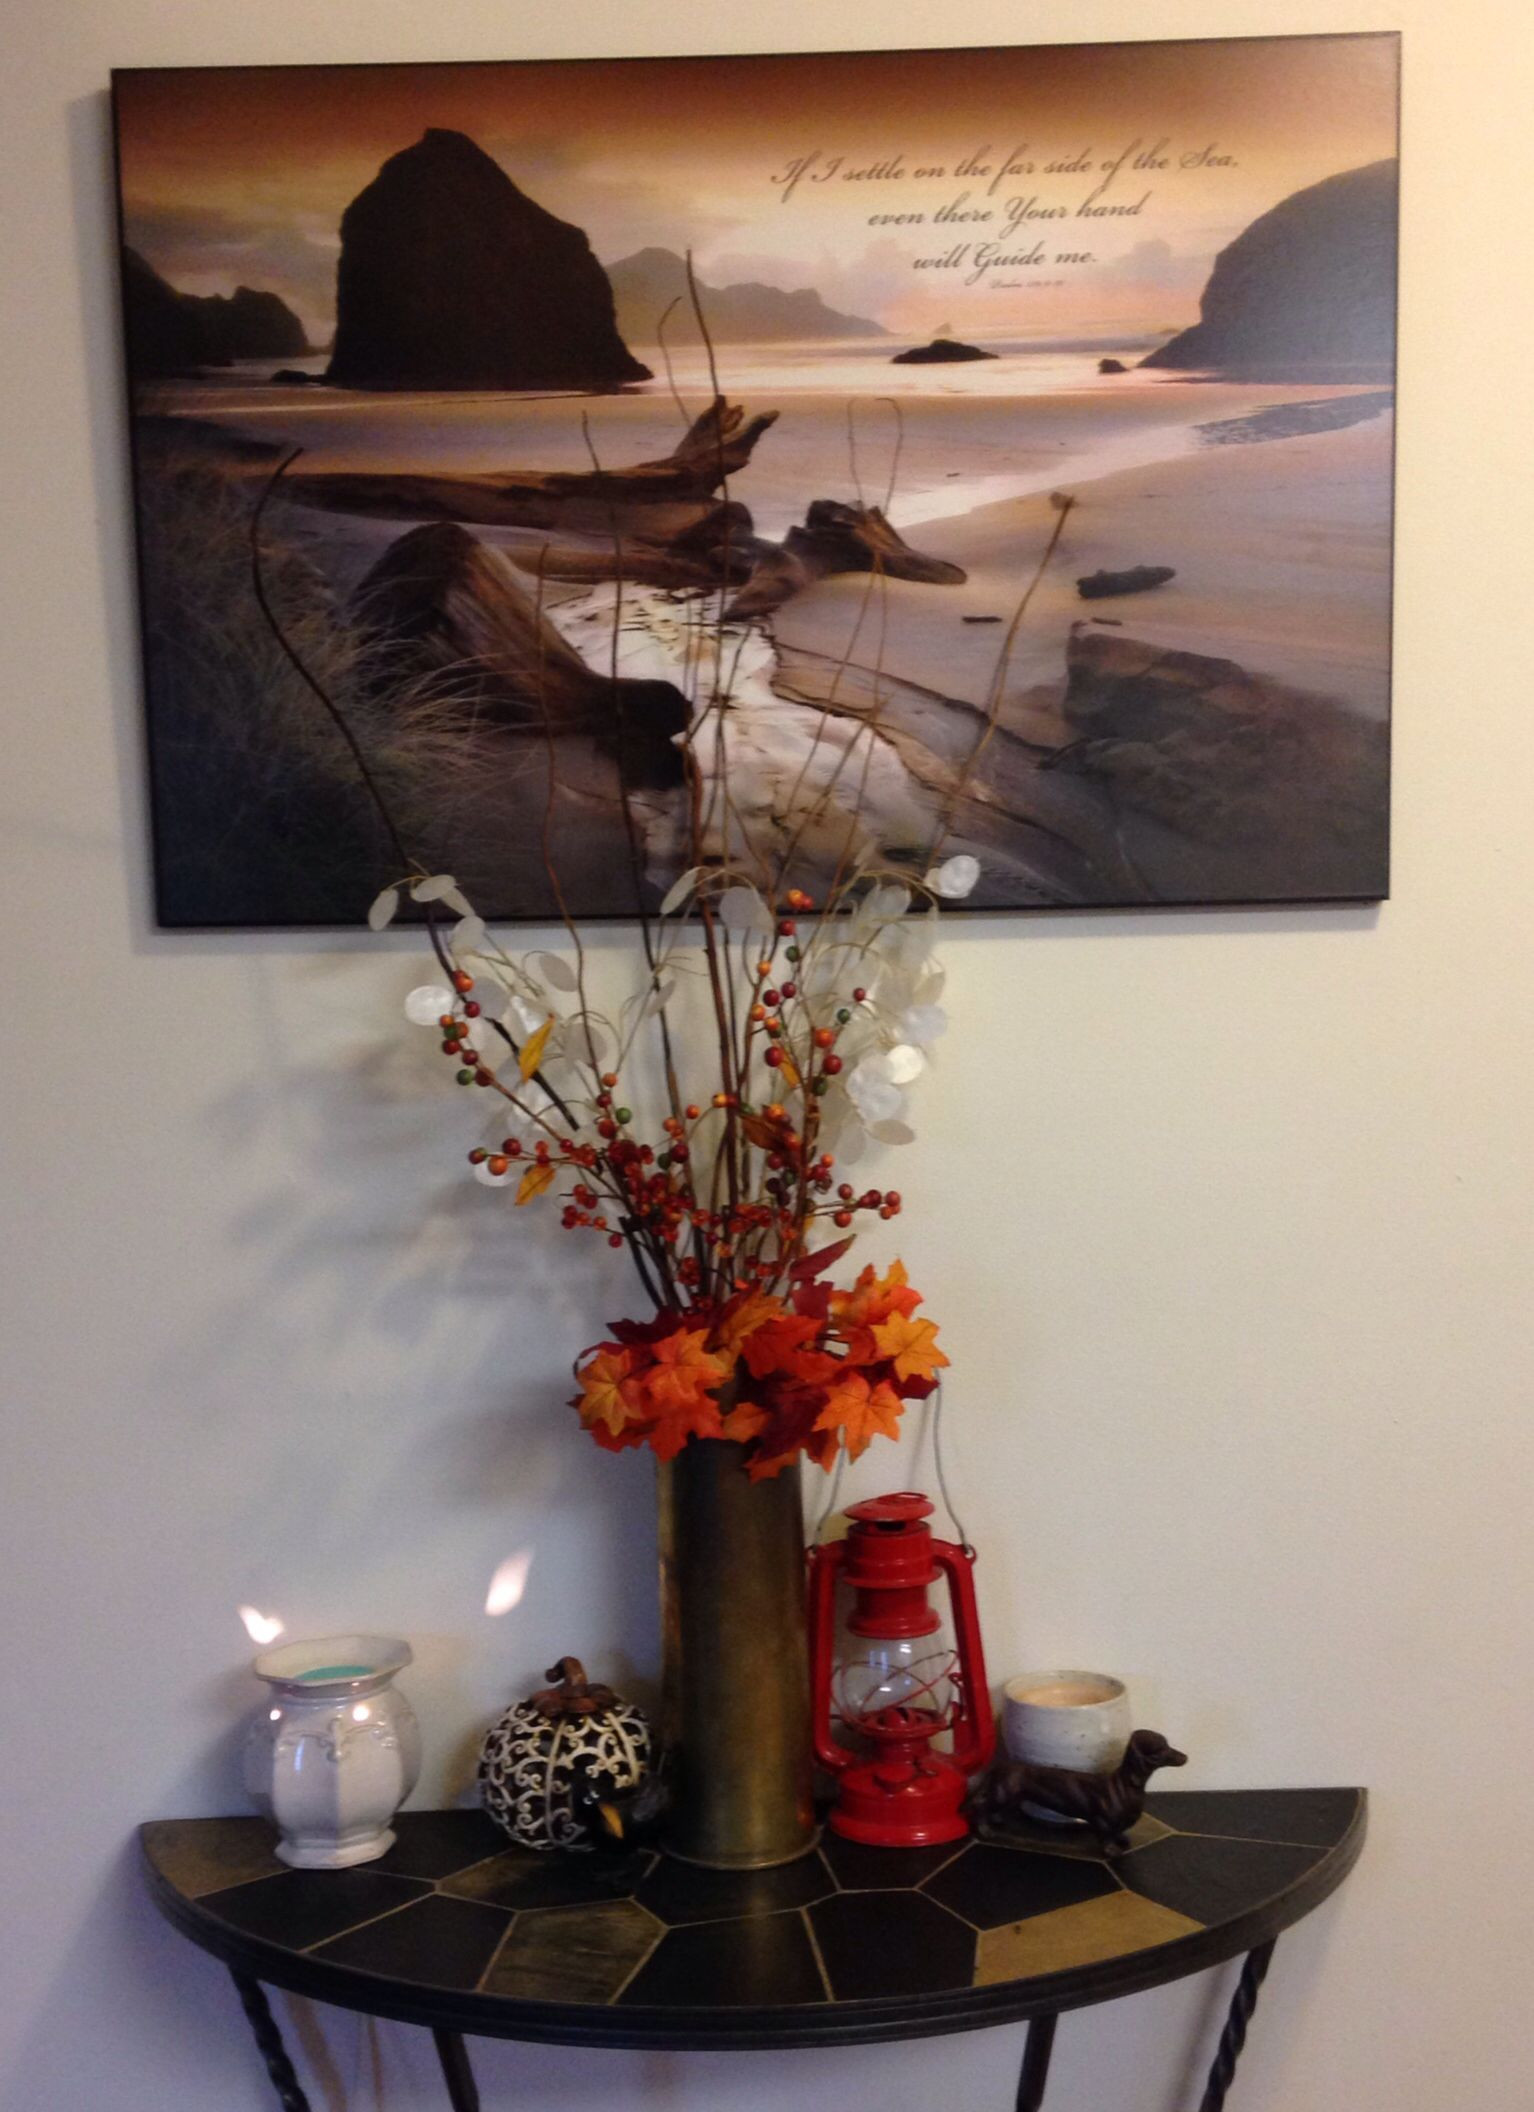 hobby lobby vases and containers of easy fall decor on my console table artillery shell filled with throughout hobby lobby a· lobbies a· easy fall decor on my console table artillery shell filled with fall foliage mini